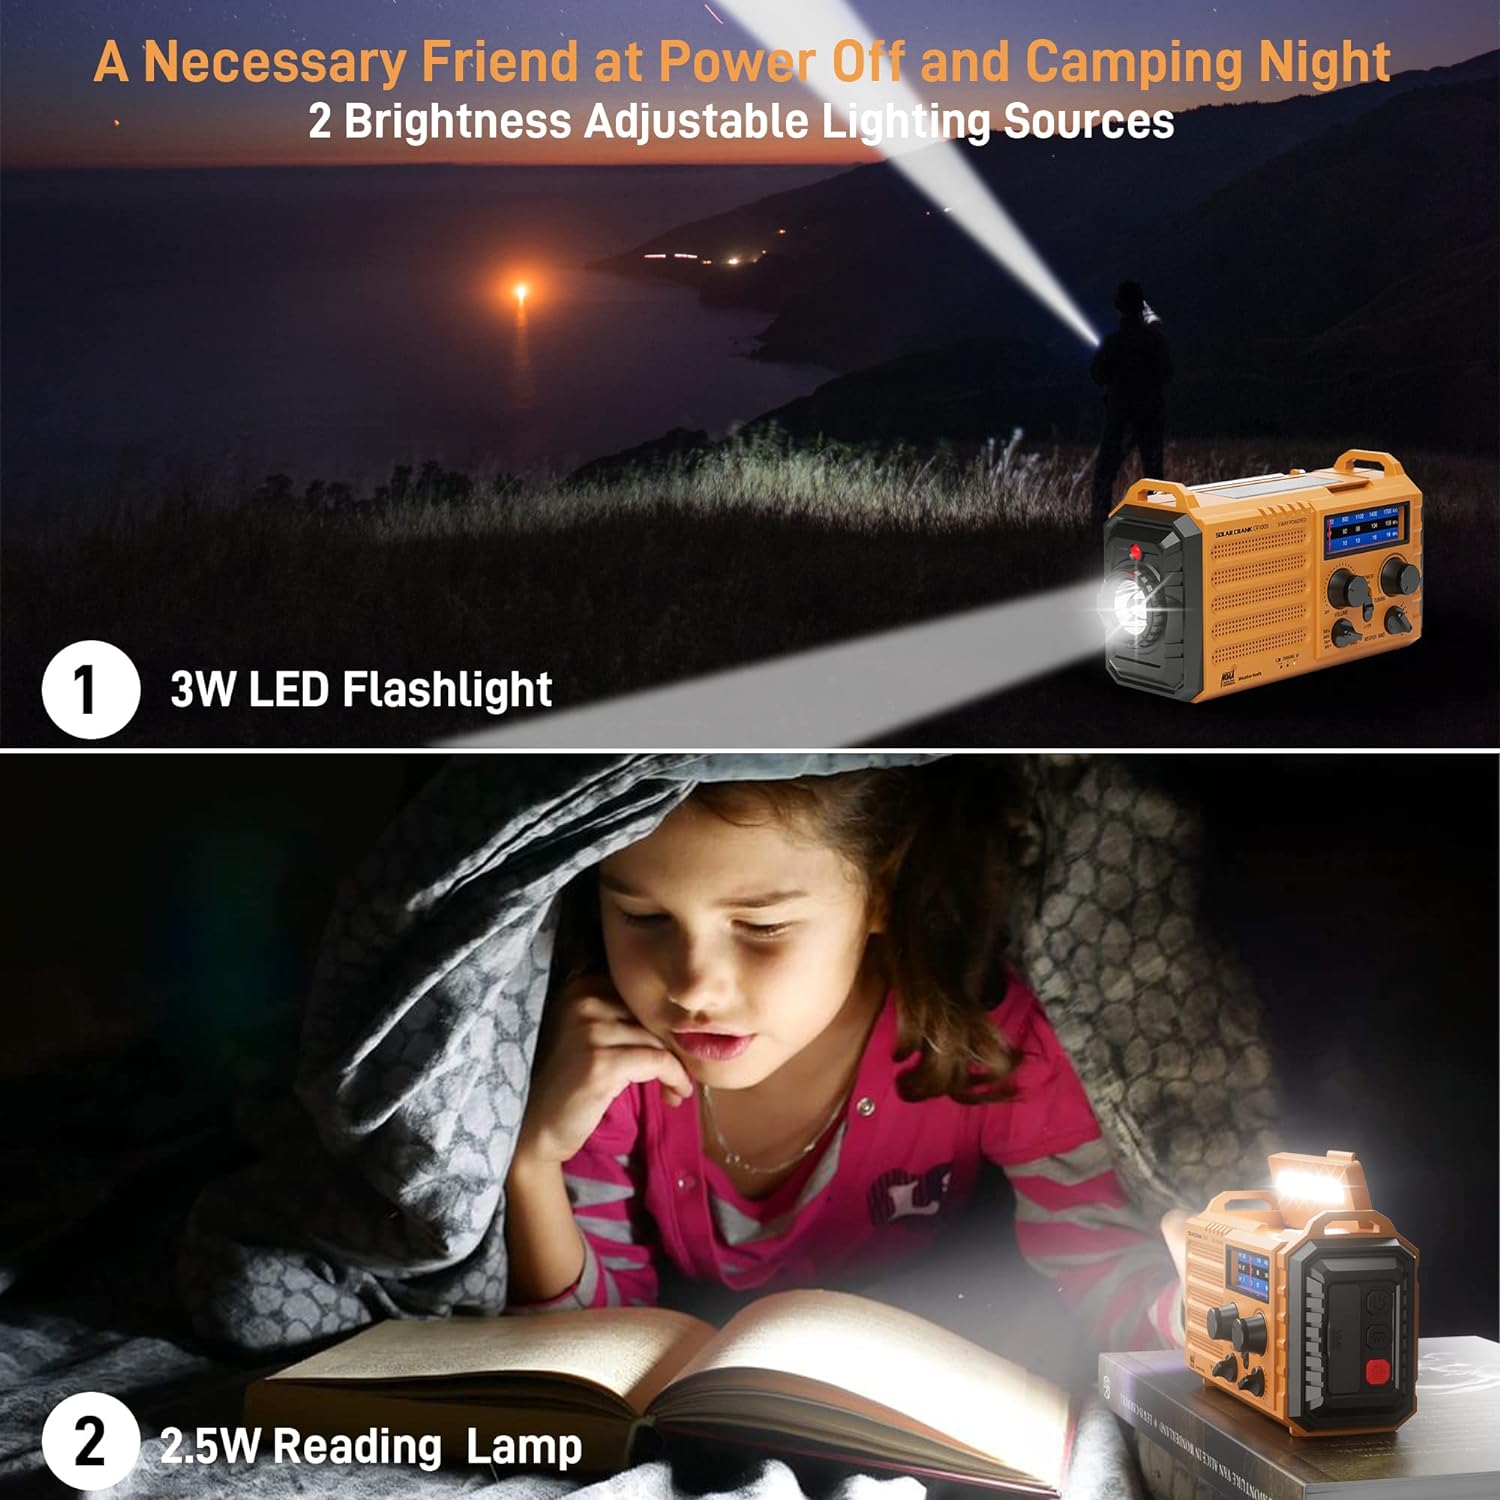 Emergency Radio with NOAA Weather Alert, Portable Solar Hand Crank AM/FM Radio for Survival,Rechargeable Battery Powered Radio,Usb Charger,Flashlight,Reading Lamp,For Home Outdoor